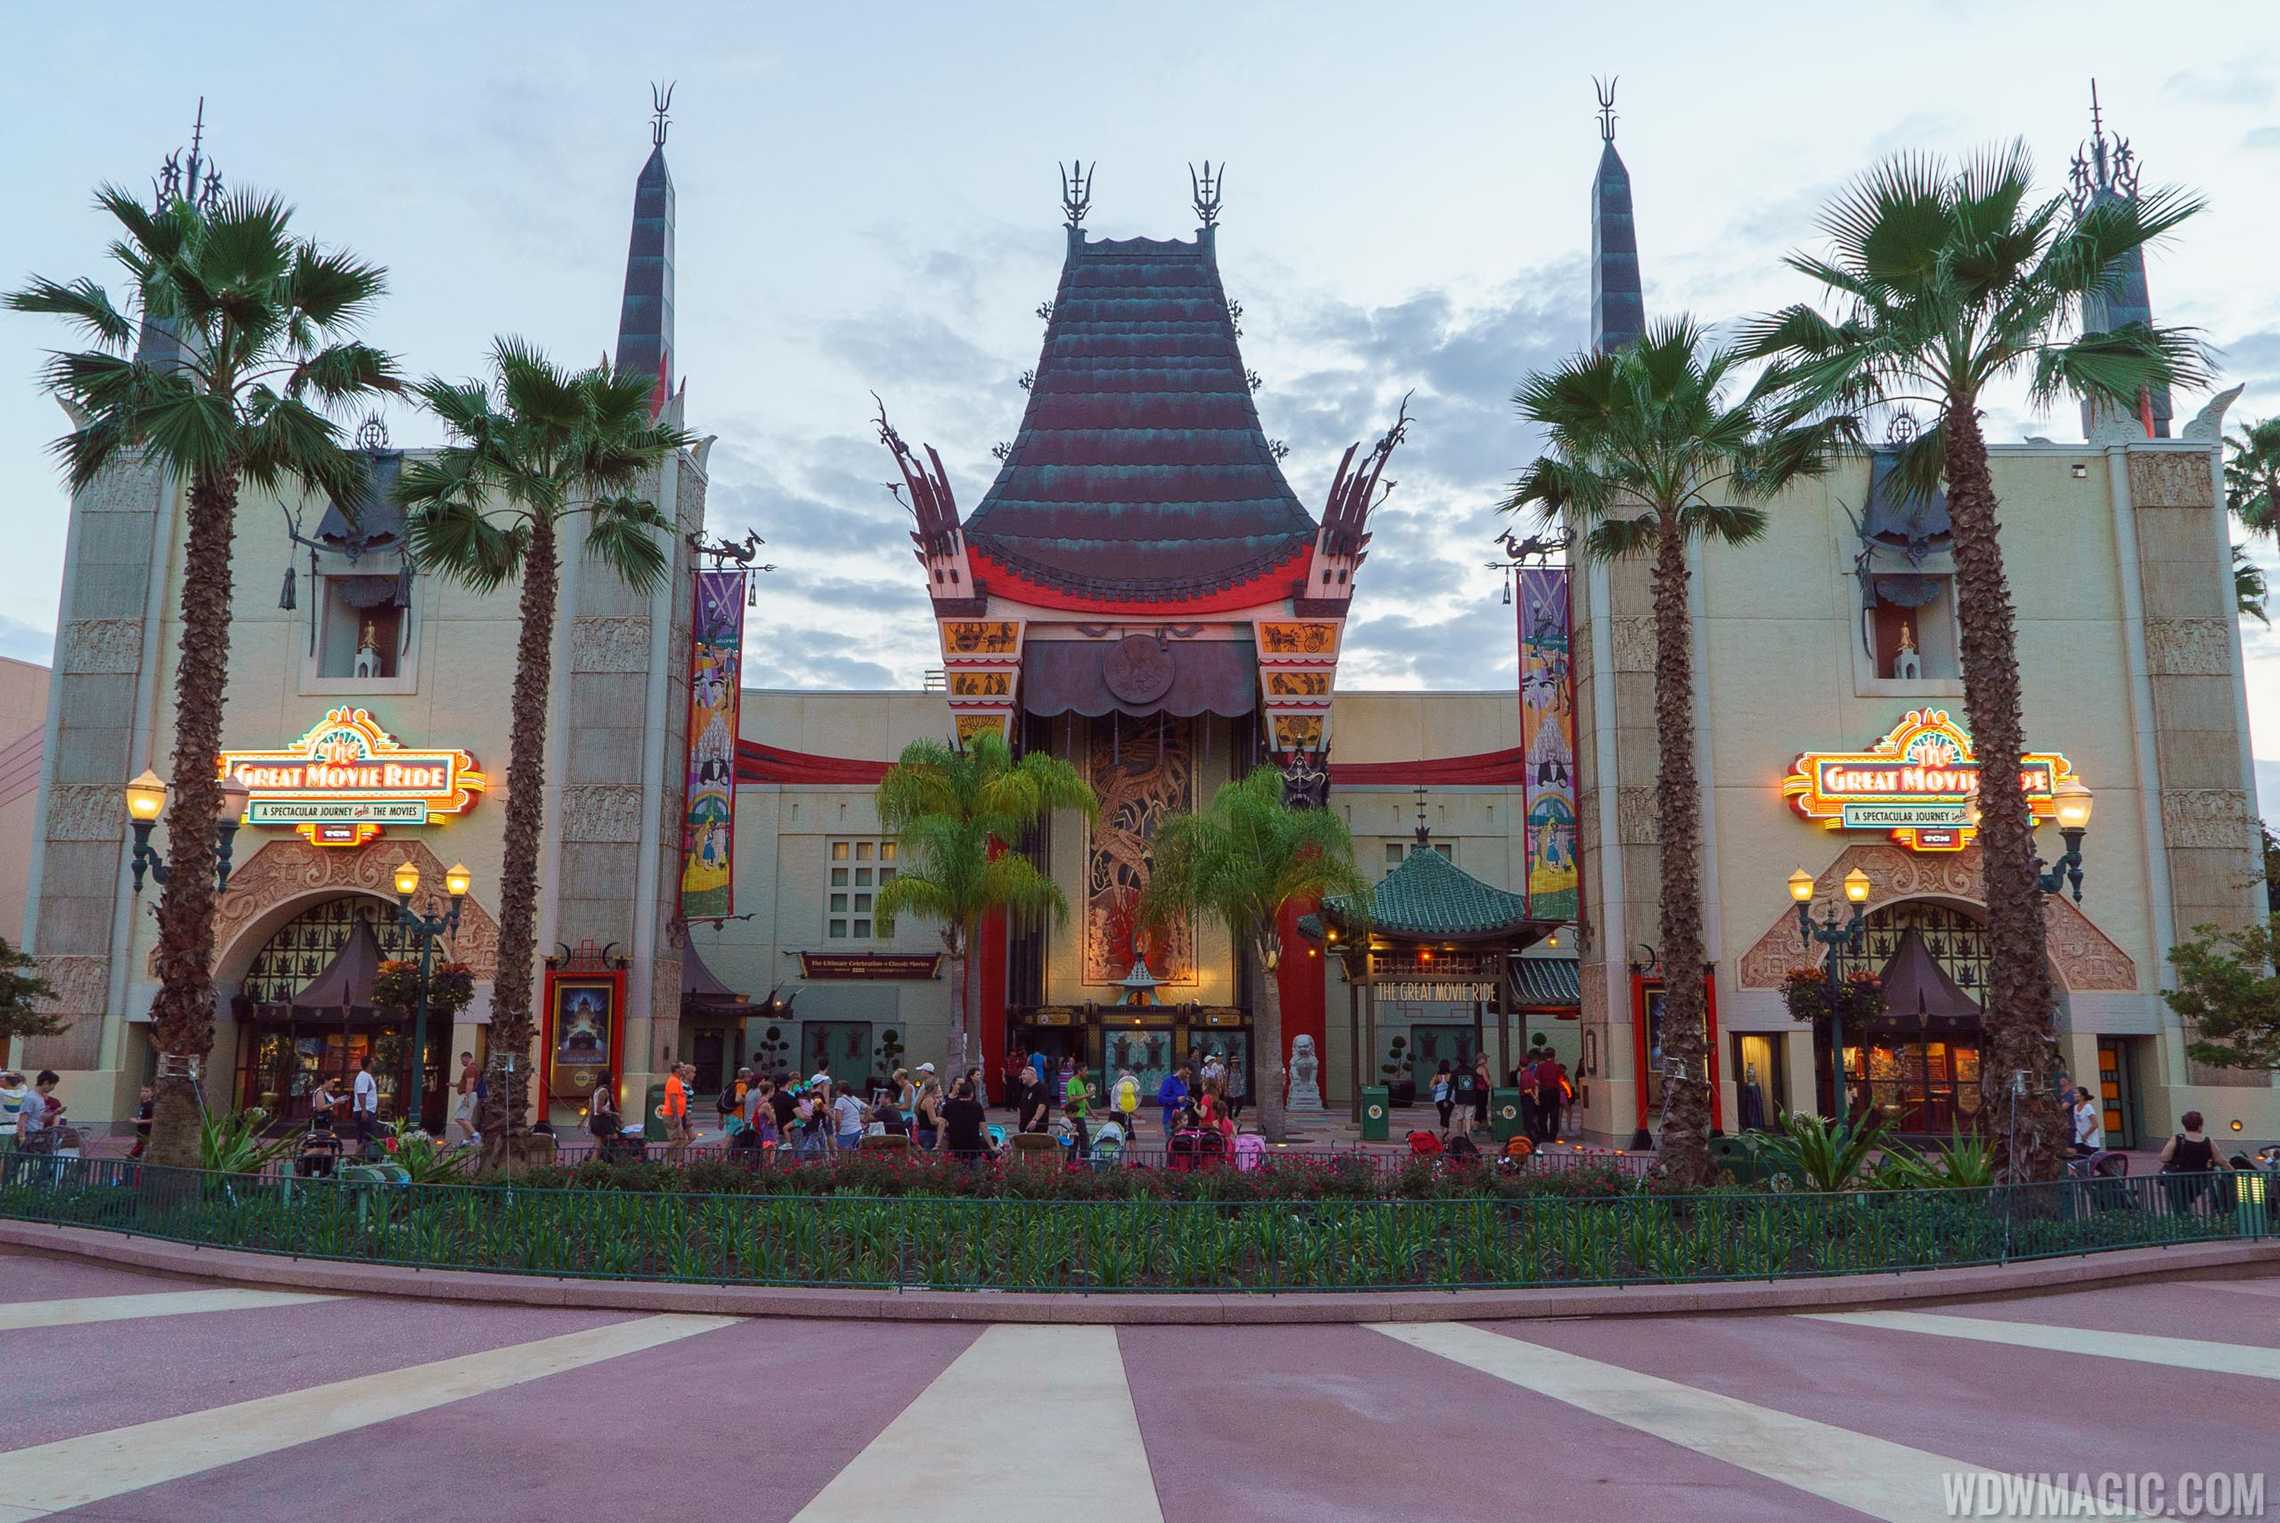 Disney's Hollywood Studios overview - Photo 1 of 1